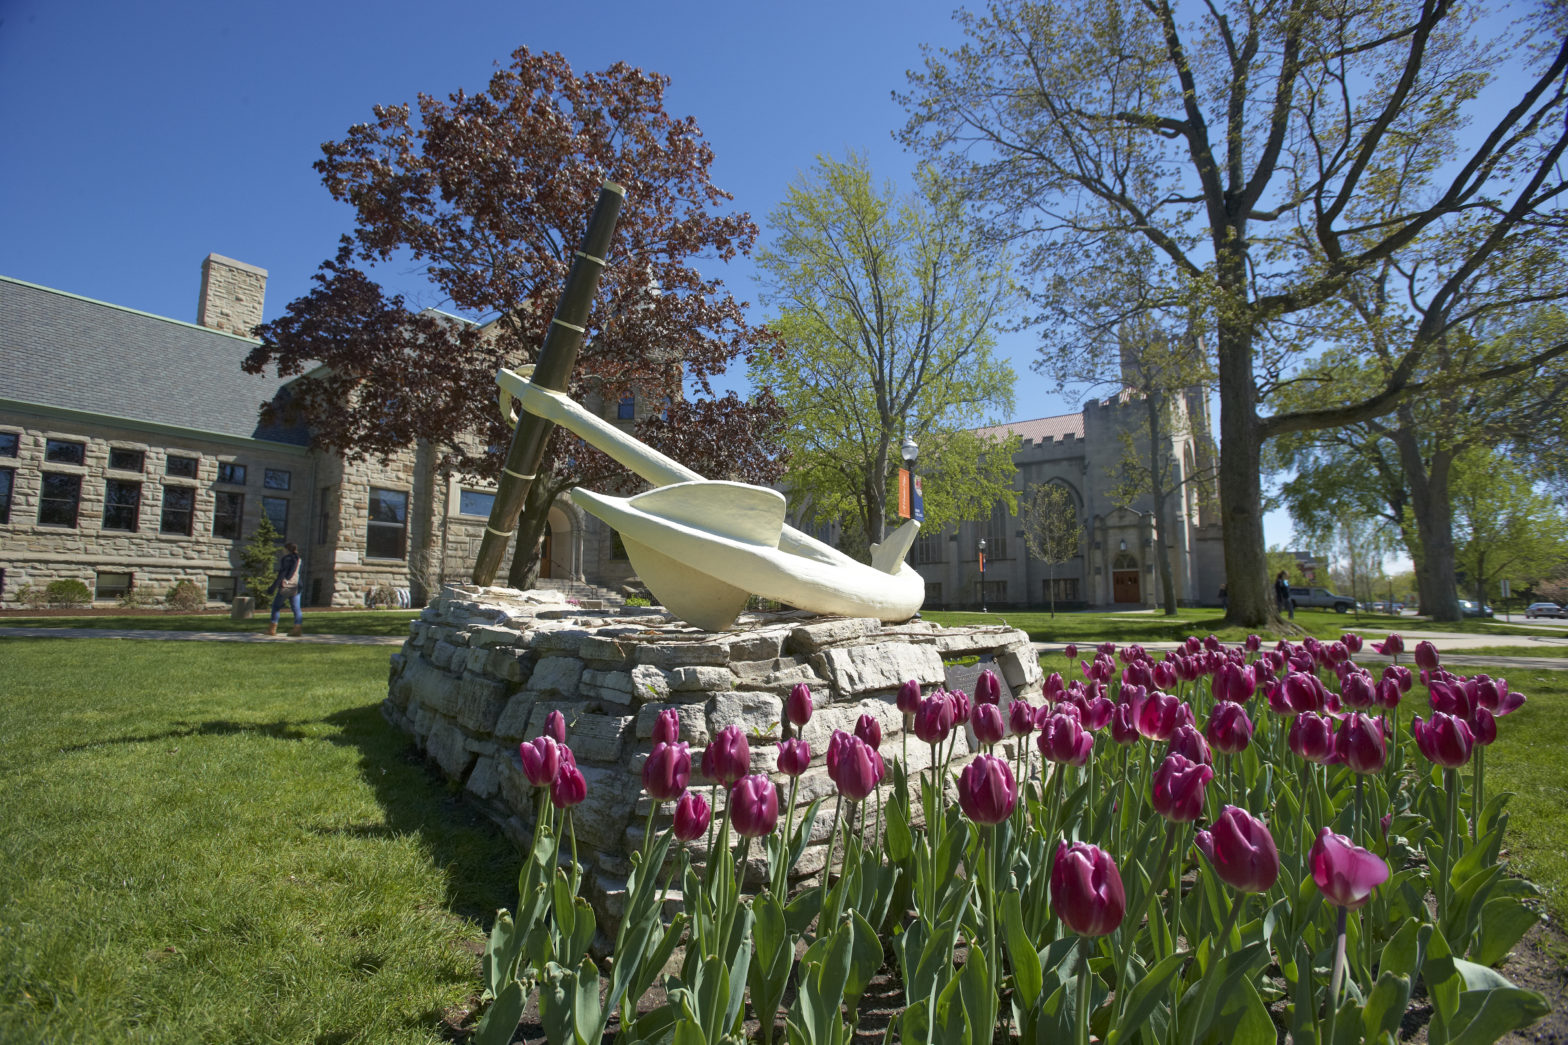 Anchor surrounded by tulips